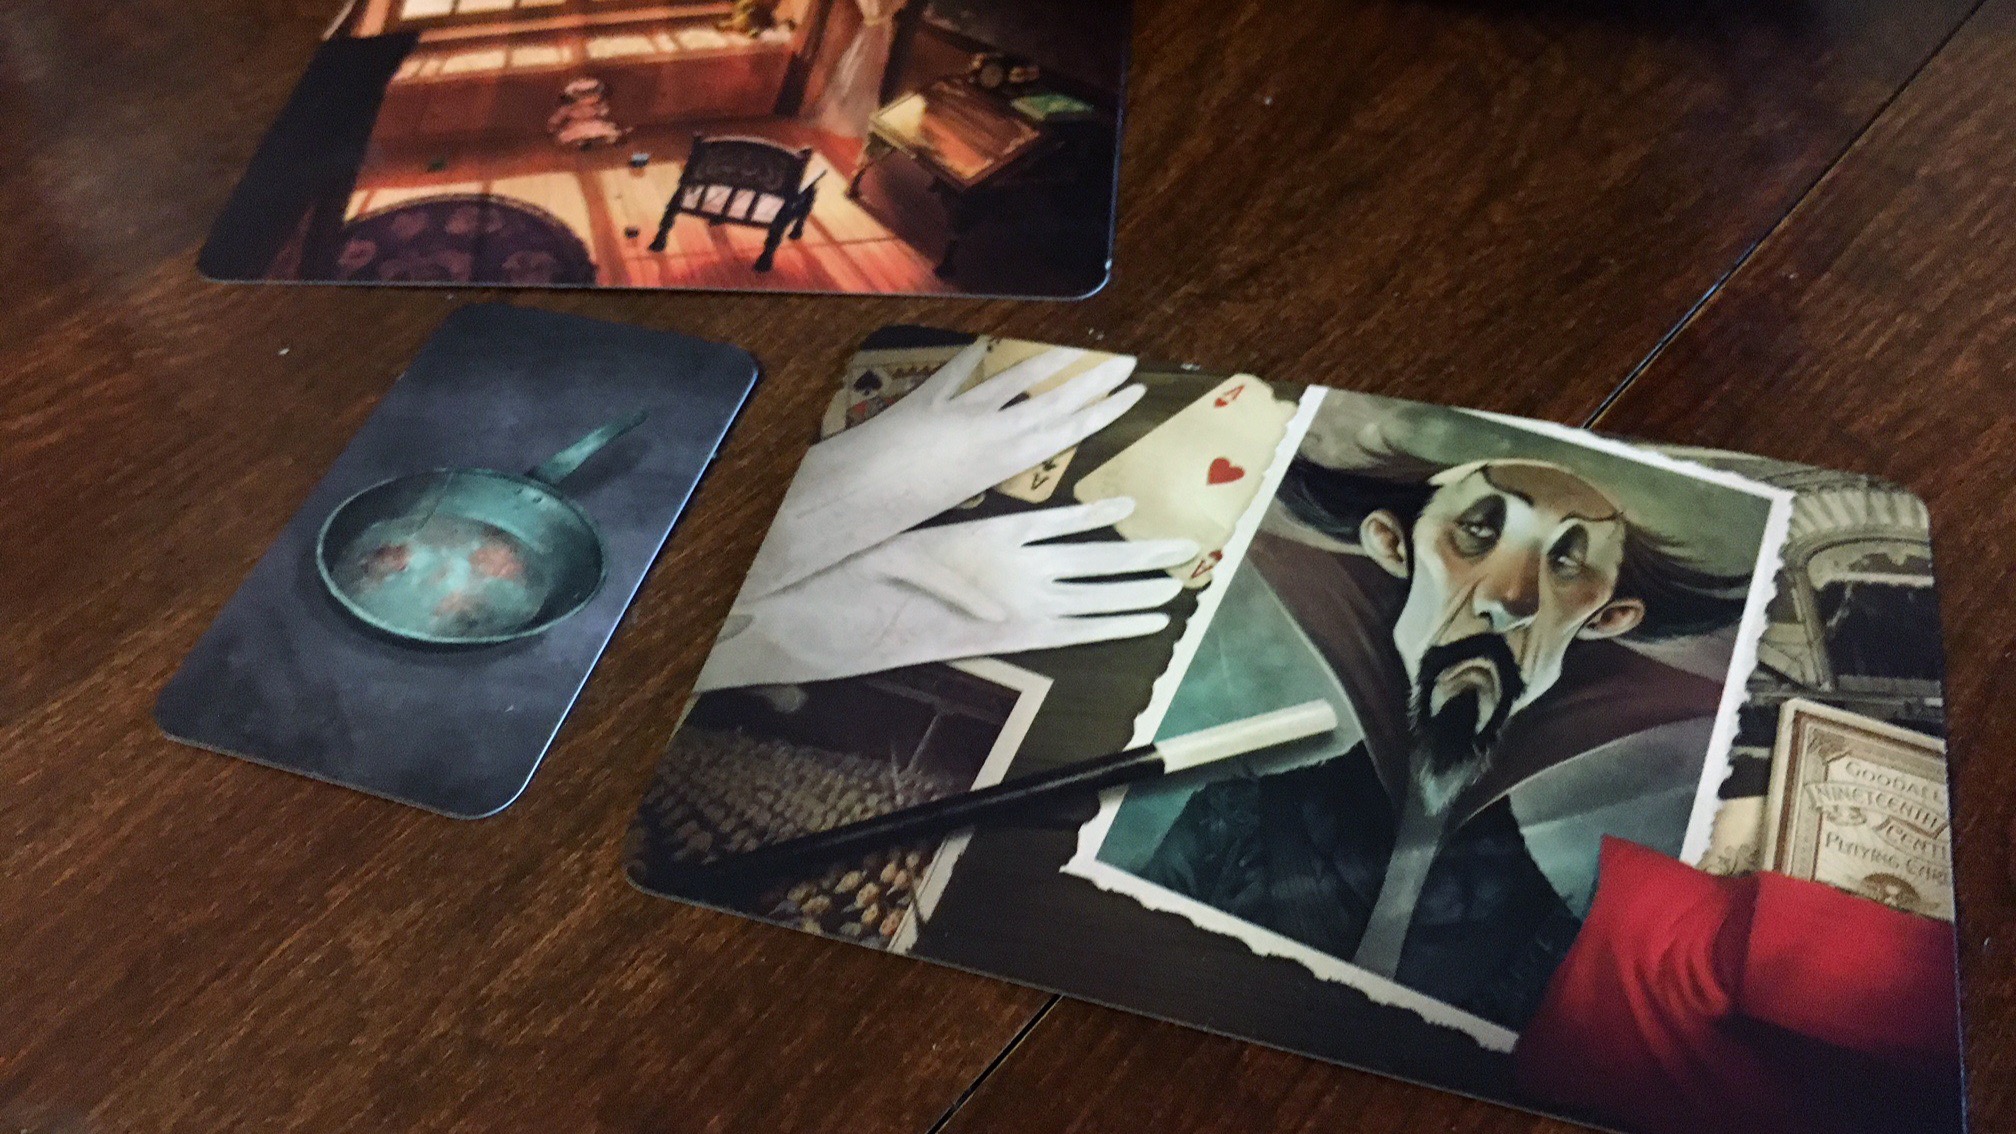 Help Save An Artistic, Emo Ghost In Mysterium